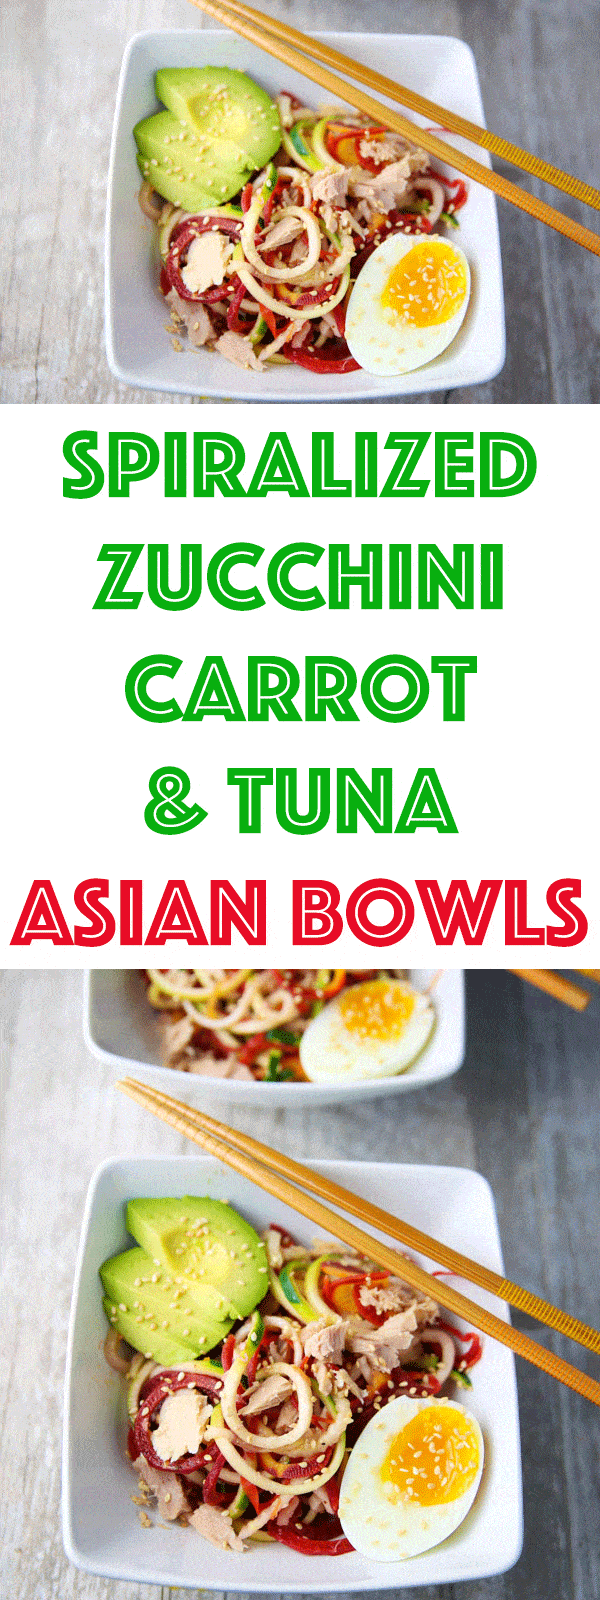 These Spiralized Zucchini Carrot and Tuna Asian Bowls are light, healthy, and oh so savory! This takes Asian Bowls to a whole new level!